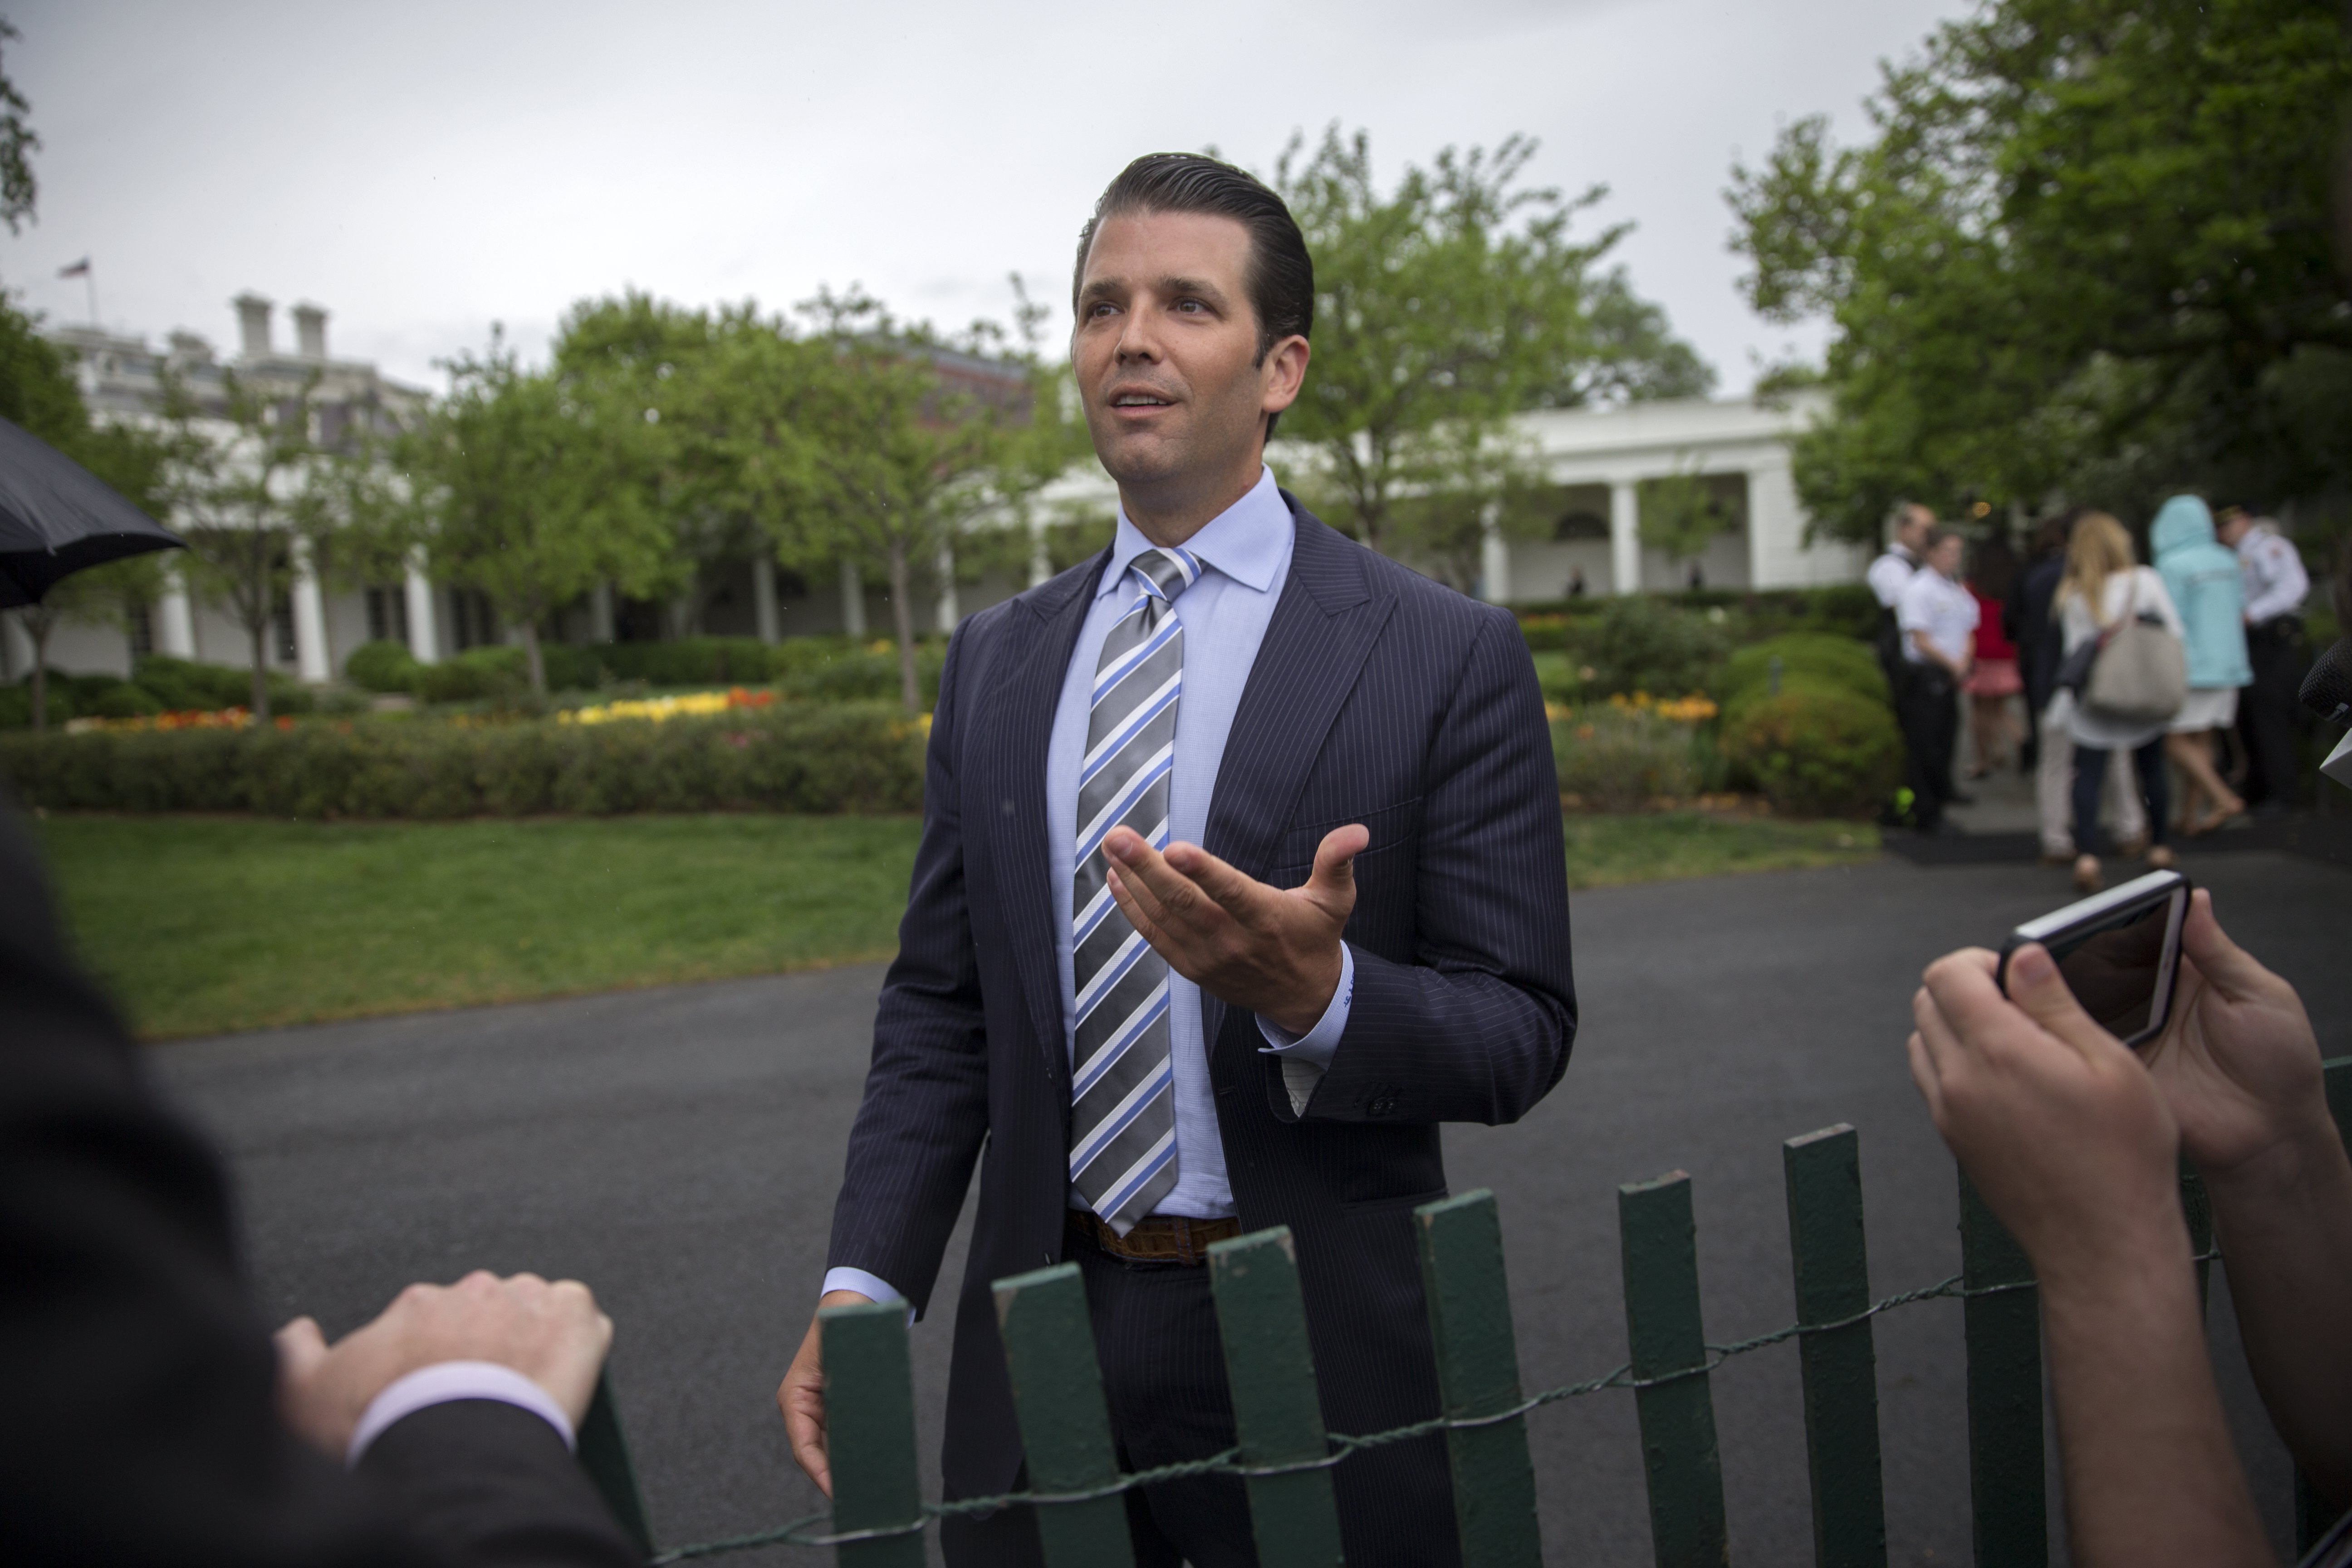 2017-04-17 11:13:30 epa05912582 Donald Trump Jr. talks to reporters during the White House Easter Egg Roll on the South Lawn of the White House in Washington, DC, USA, 17 April 2017. President Trump and First Lady Melania Trump are hosting thousands of people during the annual celebration of Easter. EPA/SHAWN THEW